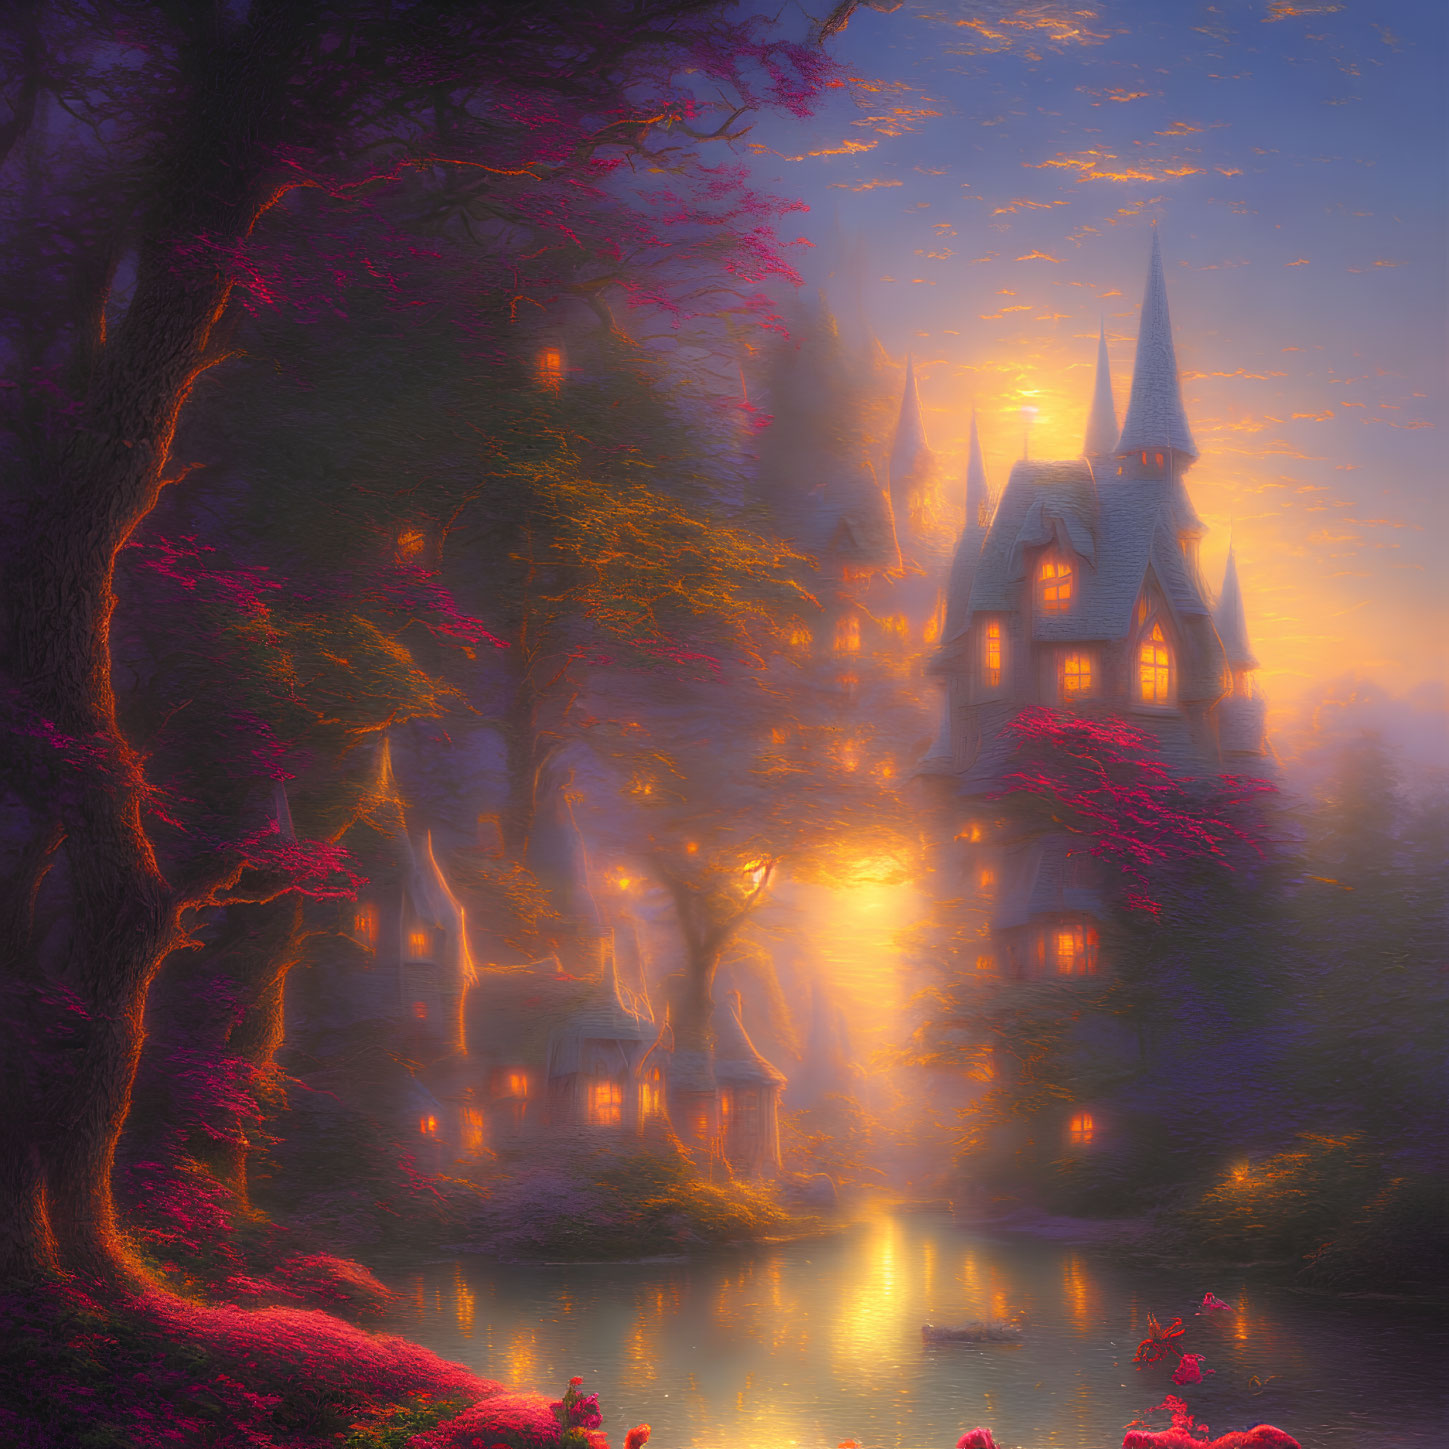 Enchanted forest castle with glowing flora, river, and sunset